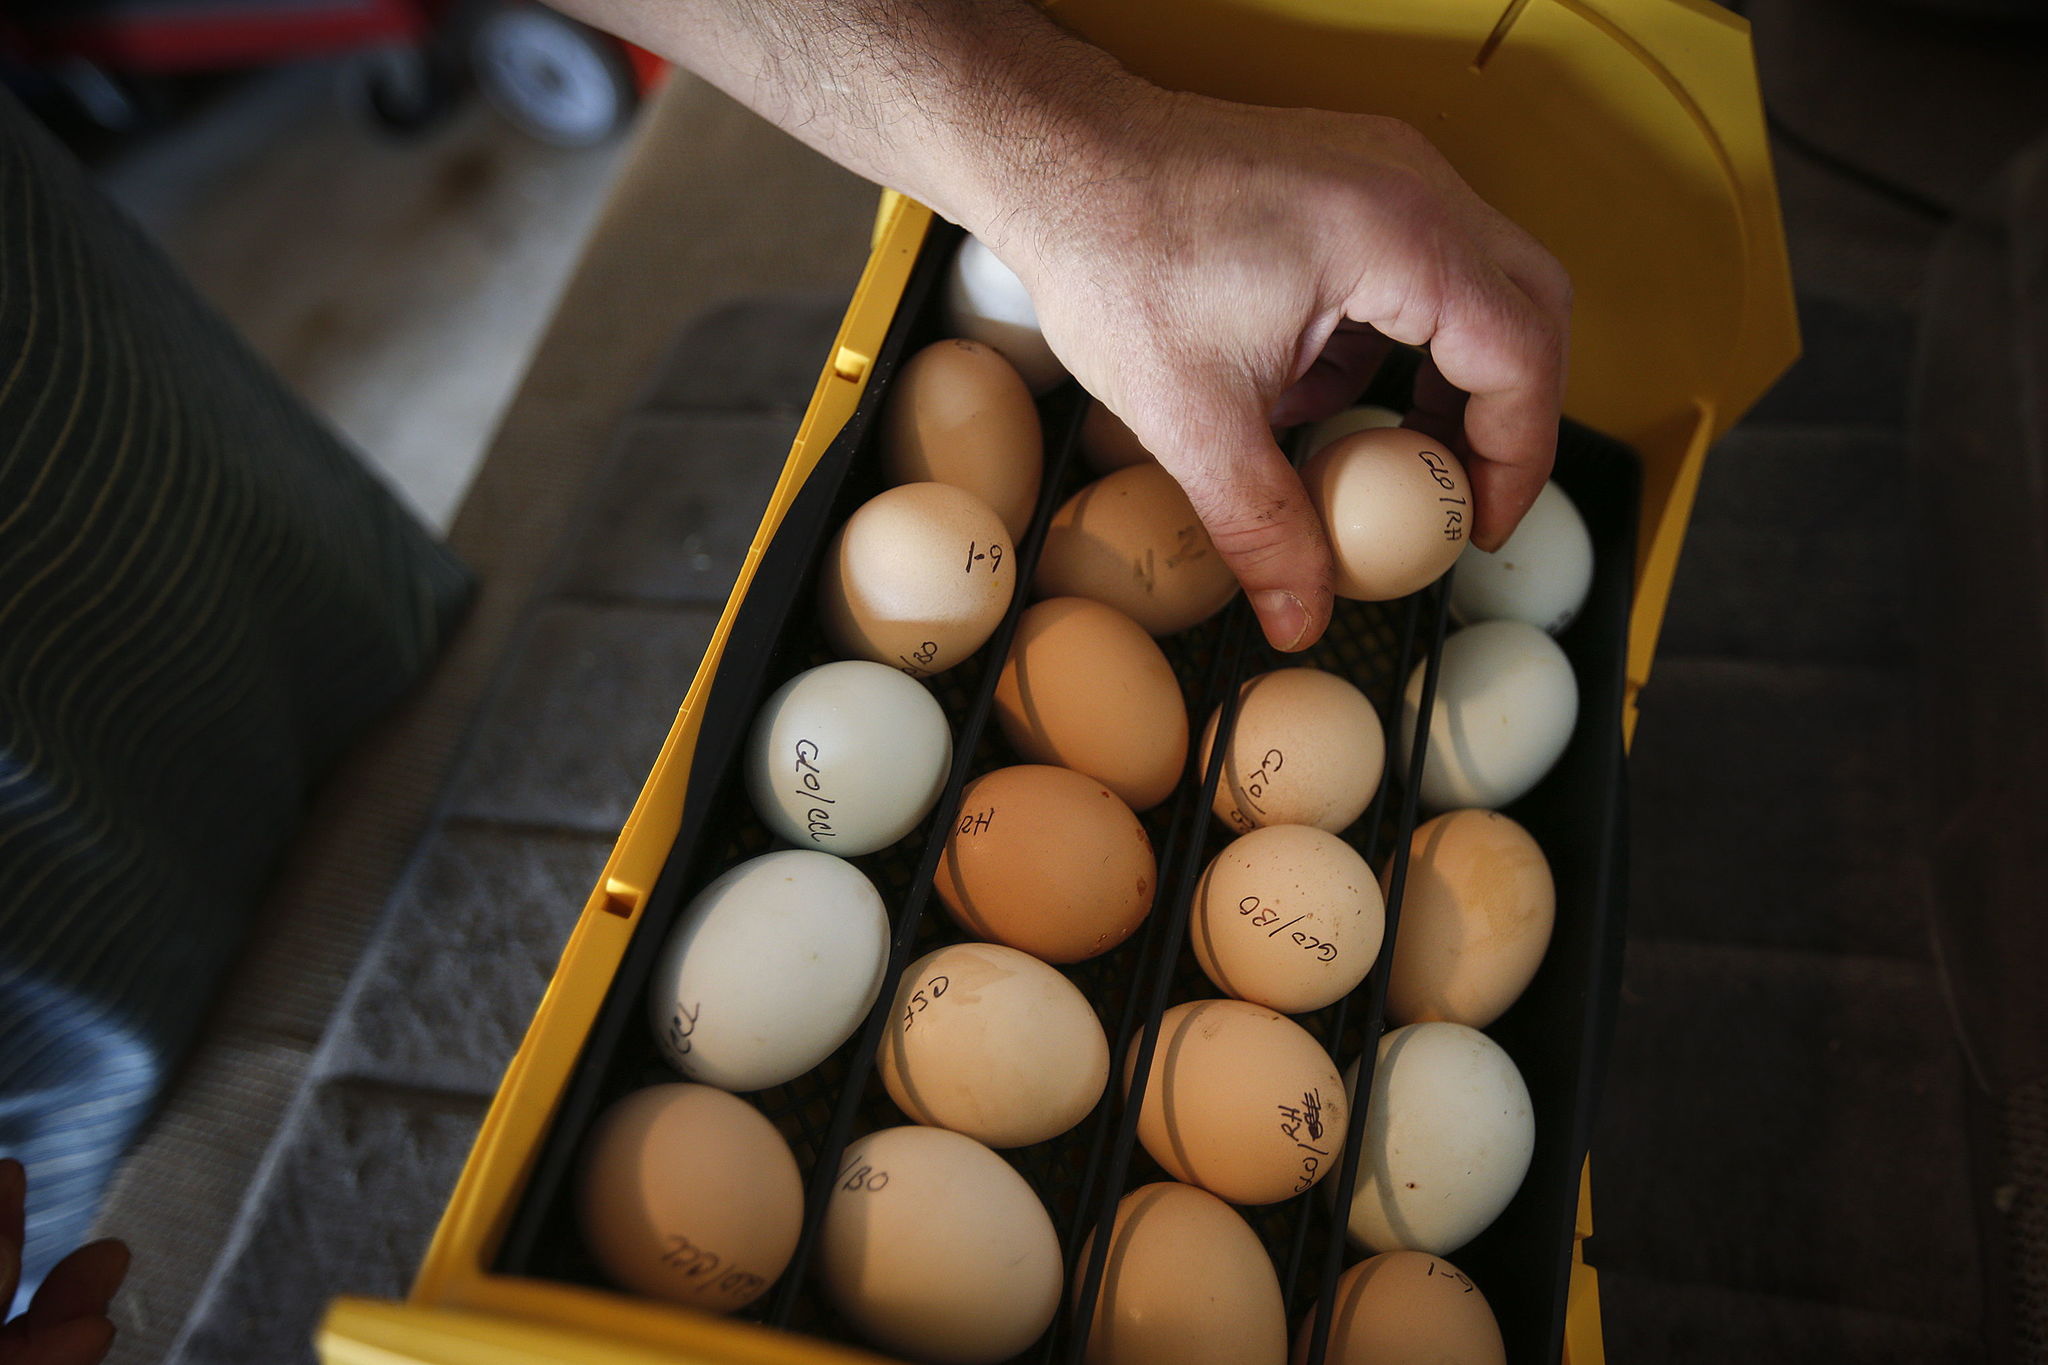 Phil Gabler opens up an incubator full of eggs waiting to hatch in the garage of his home in Mukilteo on June 8. Gabler recently listed his house for sale and would like to move to a property that allows him space for more chickens.